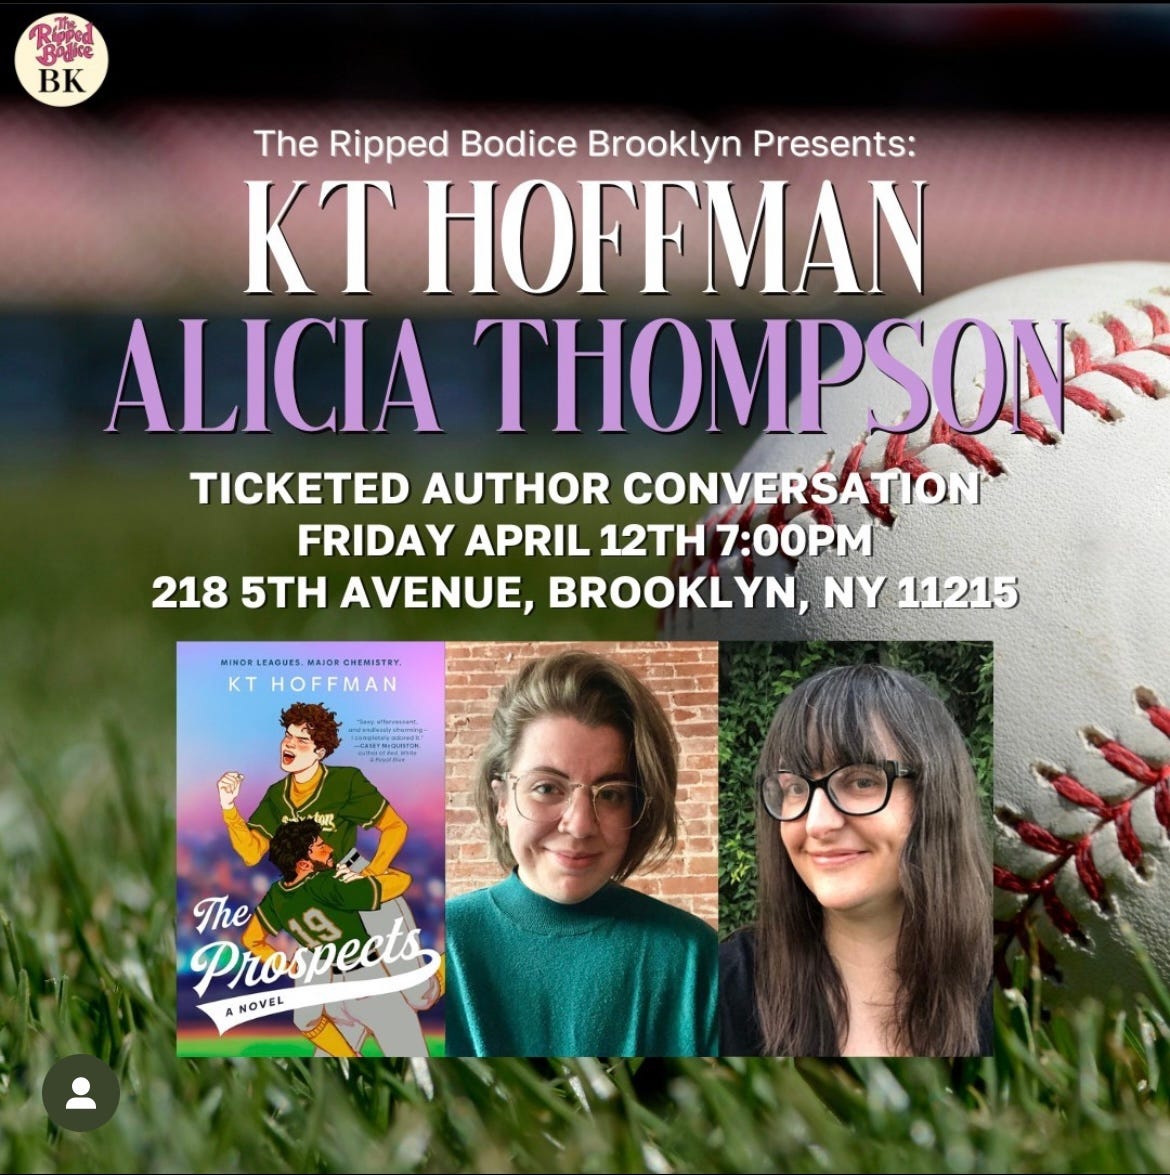 Graphic for Ripped Bodice event that says KT Hoffman and Alicia Thompson, Ticketed Author Conversation, Friday April 12th at 7:00pm, 218 5th Avenue, Brooklyn, NY 11215, and has pictures of KT's book The Prospects, KT, and me!